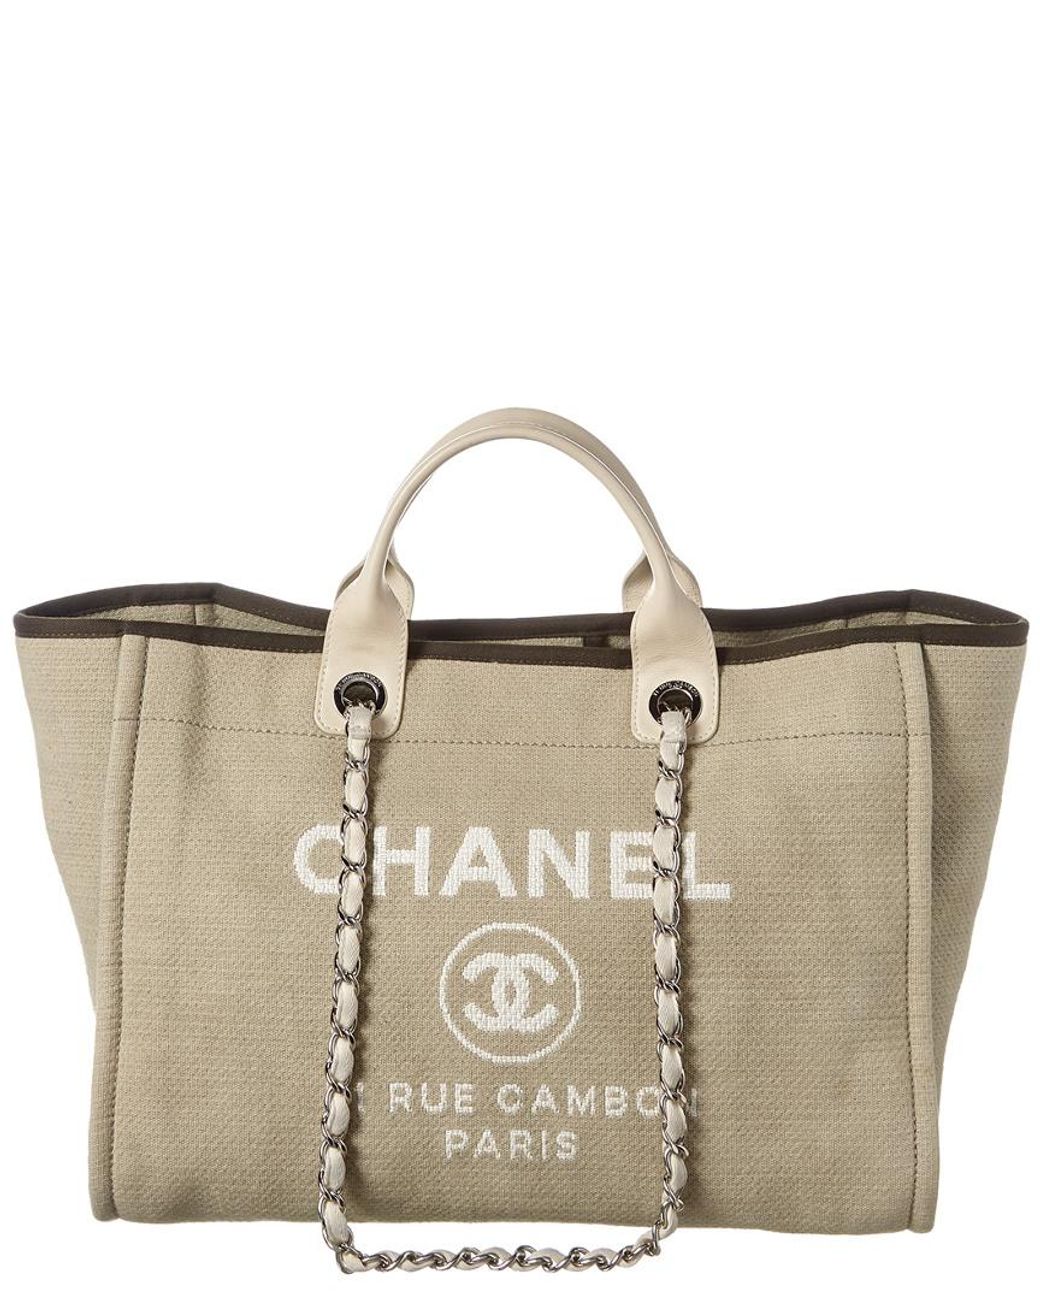 Inspiration ammunition Maori Chanel Beige Canvas Xl Deauville Tote in Natural | Lyst UK